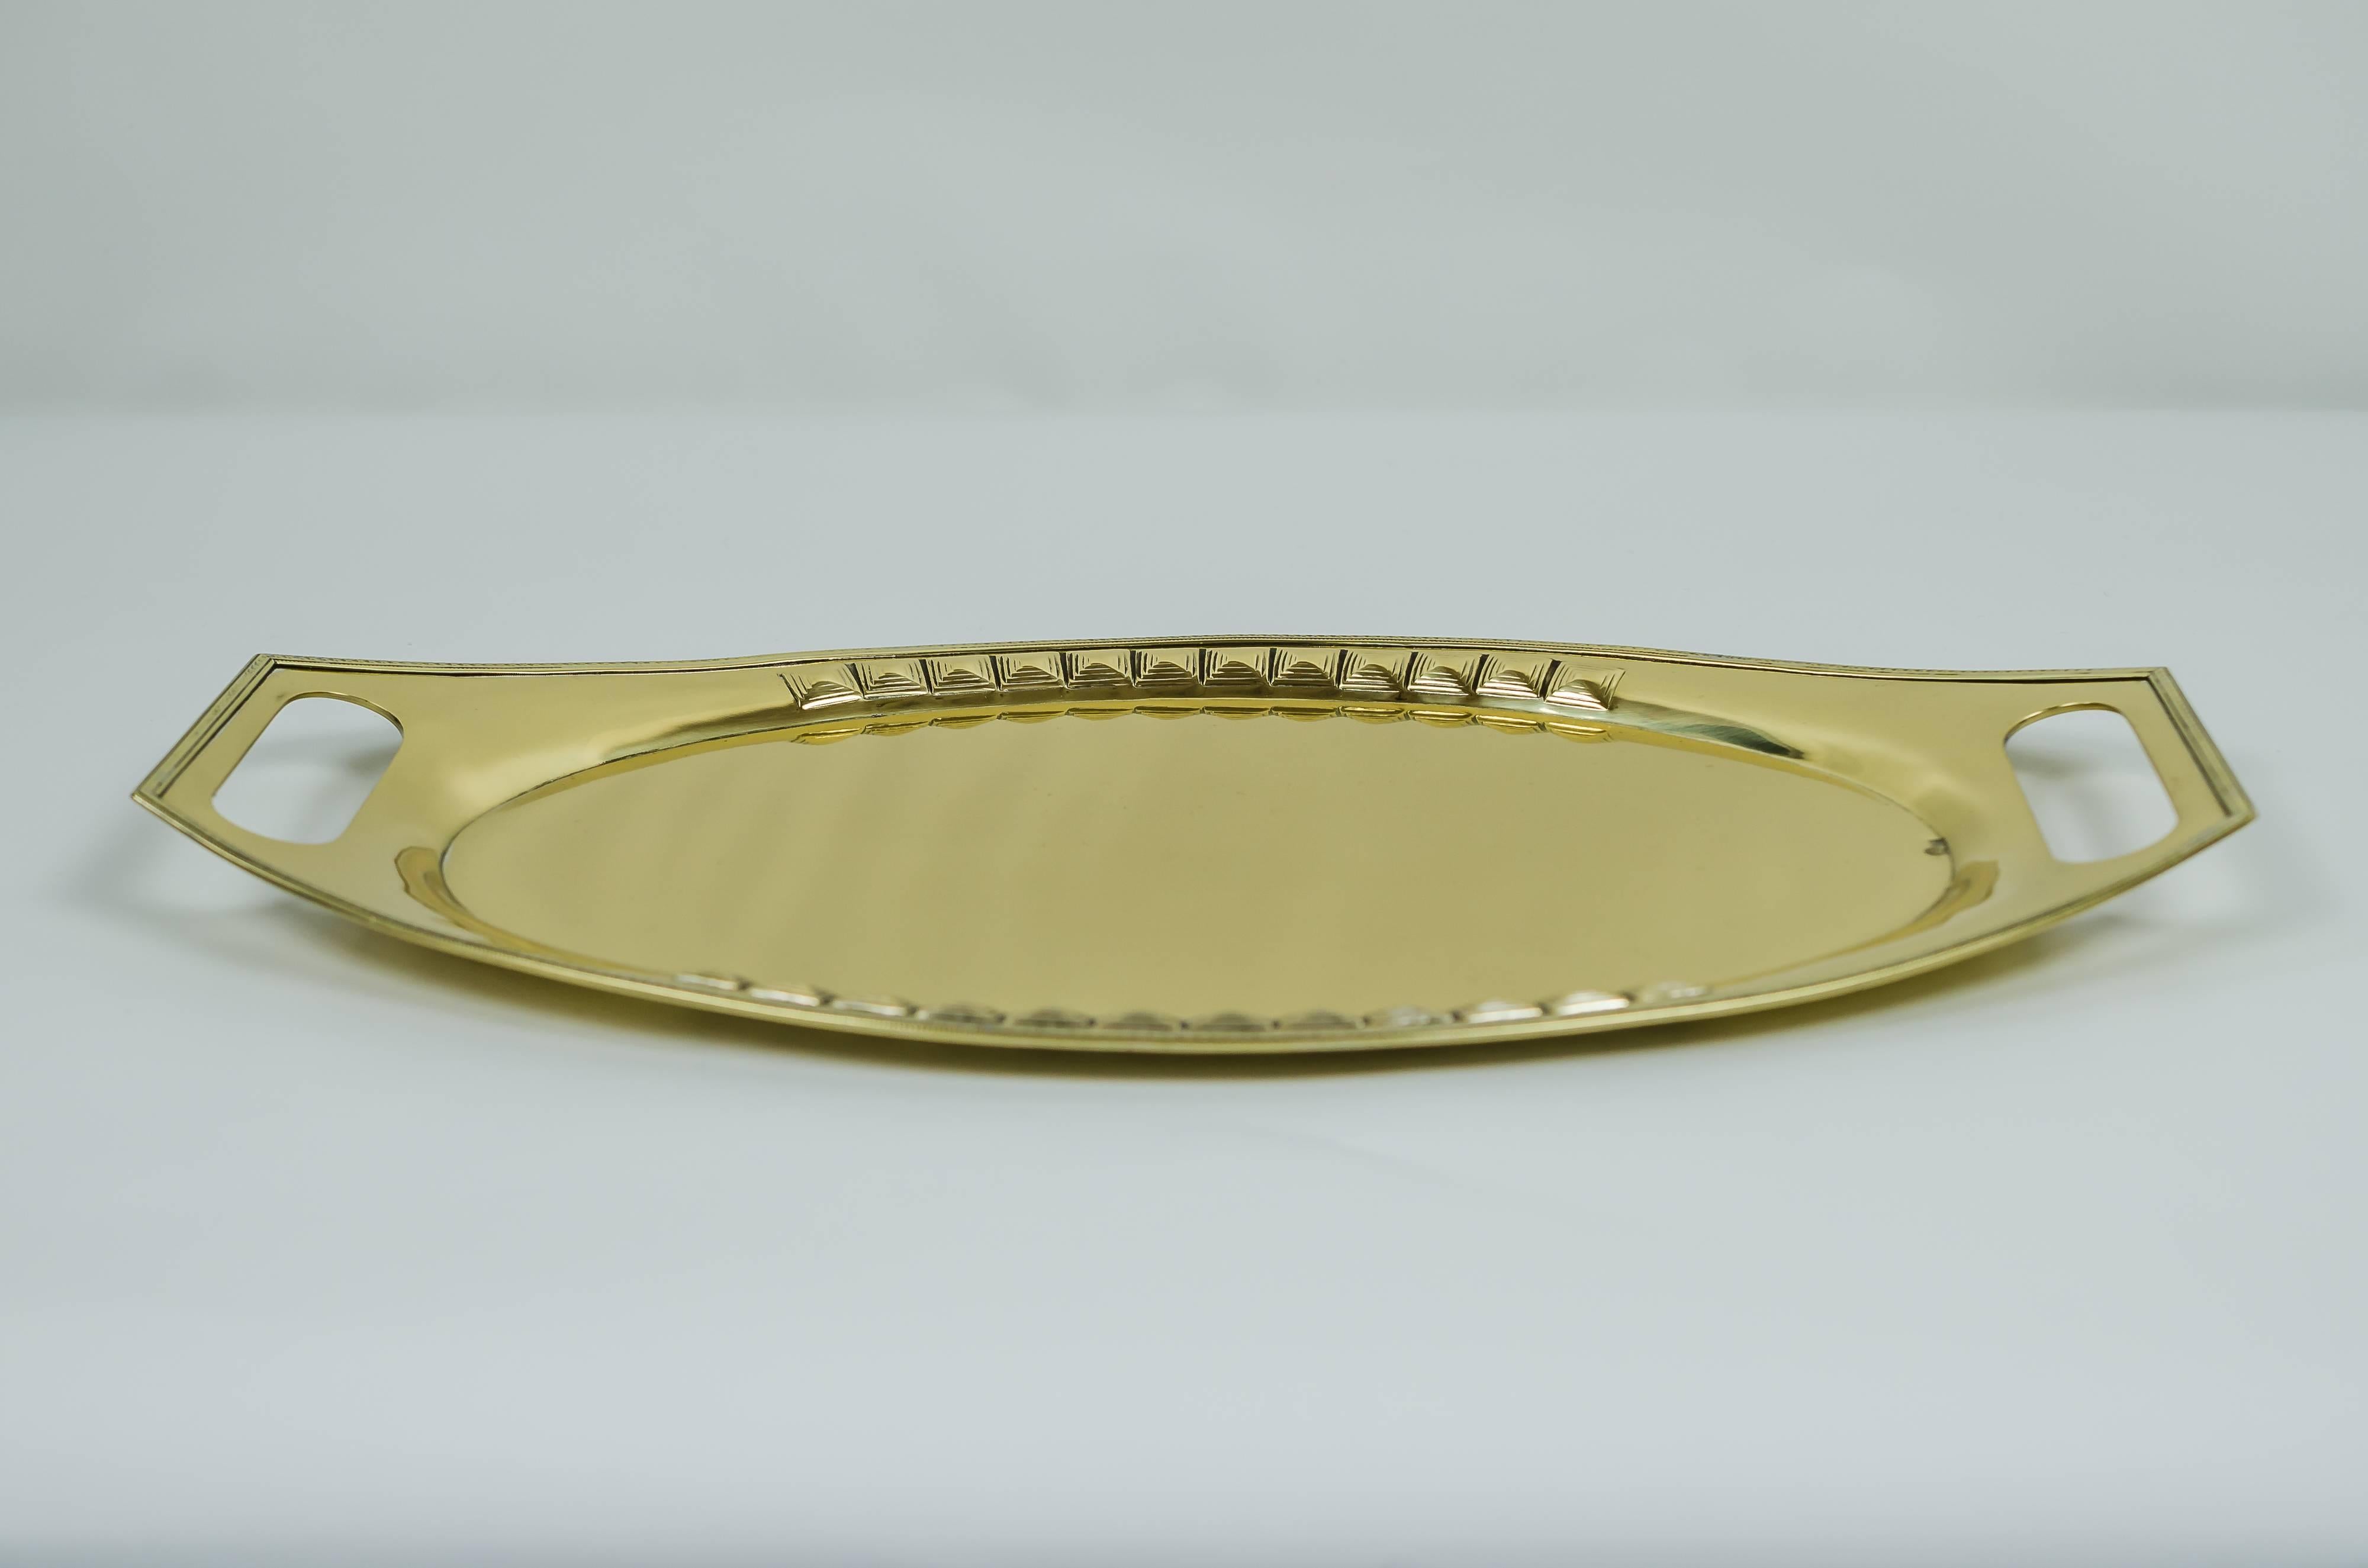 Art Nouveau serving plate by Argentor, circa 1910s
Polished and stove enamelled
Marked by argentor.
         